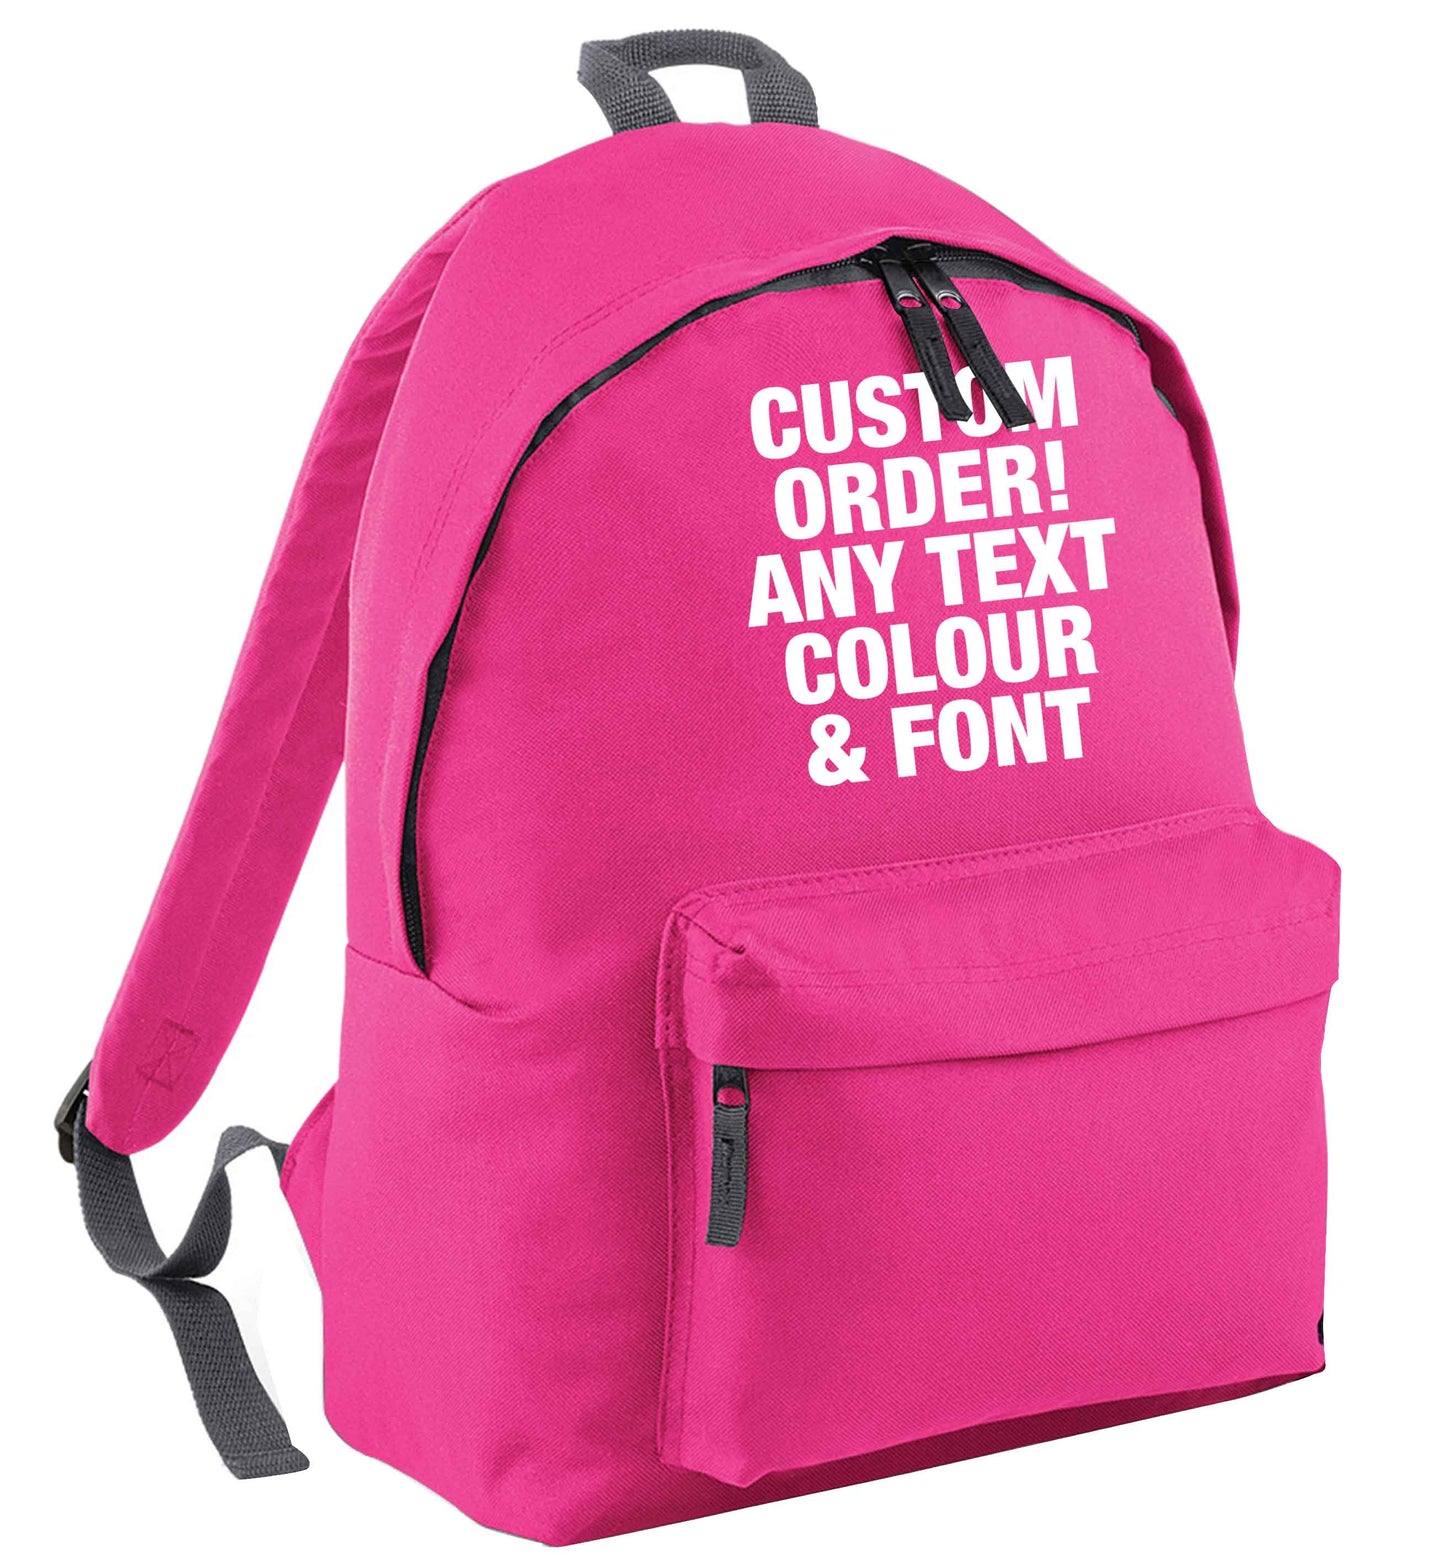 Custom order any text colour and font | Children's backpack